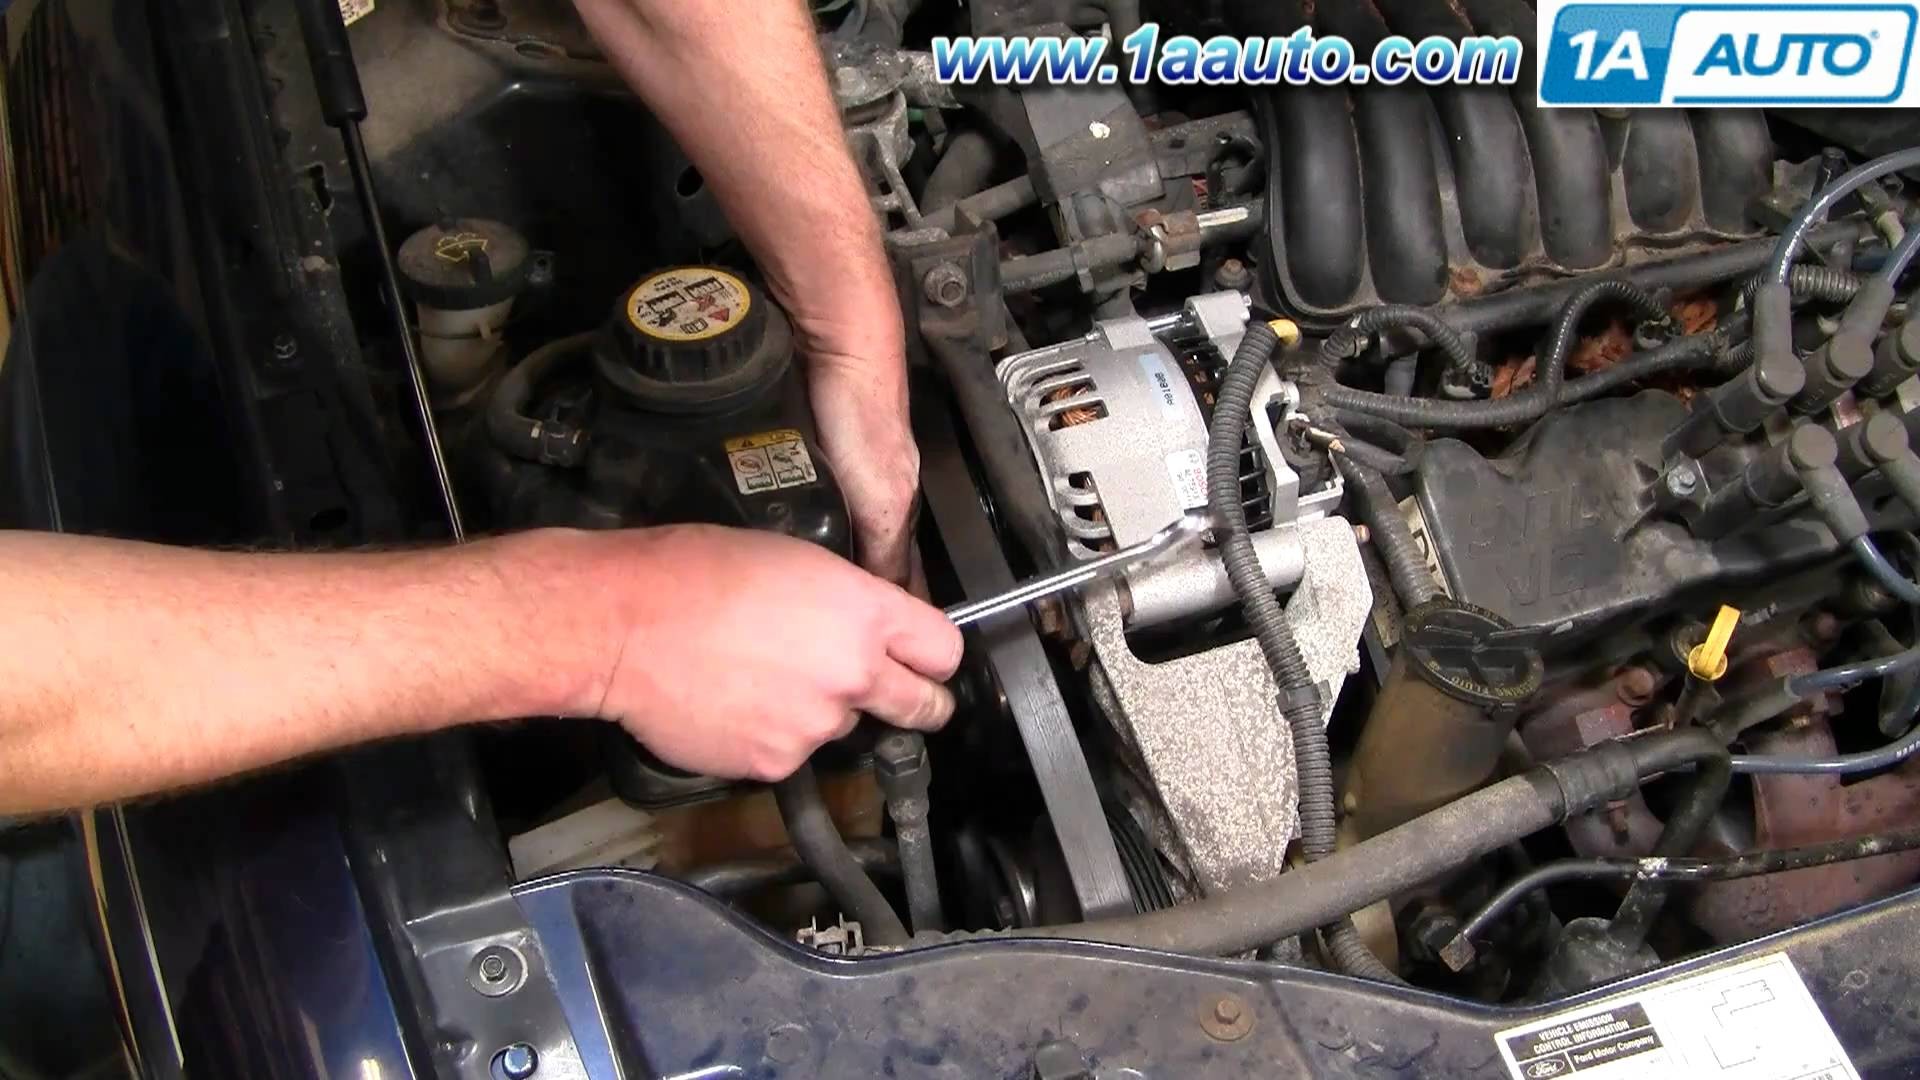 2001 ford Explorer Sport Engine Diagram How to Install Replace Serpentine Belt Idler Pulley ford Taurus 3 0l Of 2001 ford Explorer Sport Engine Diagram